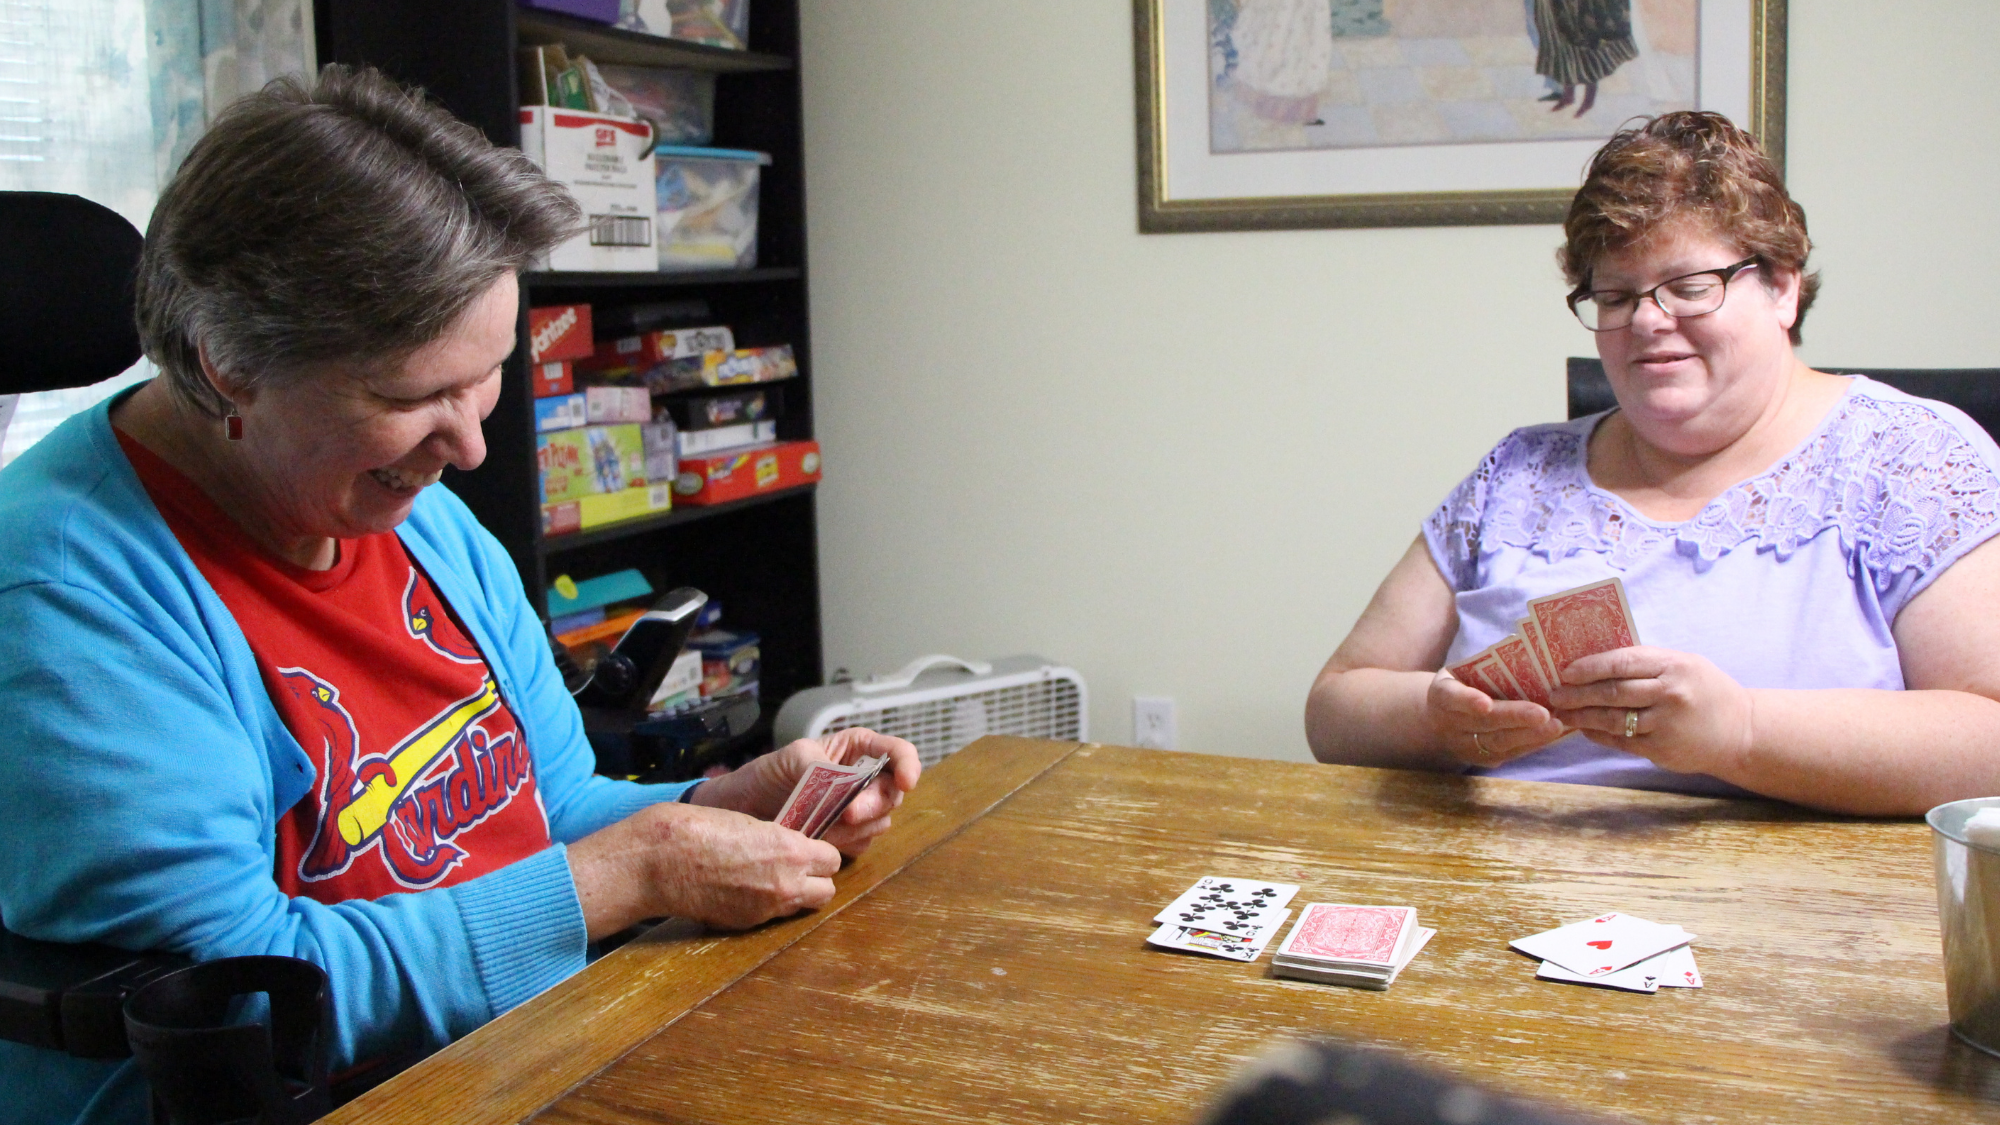 Emmaus Team Member Shelly playing cards with Emmaus client